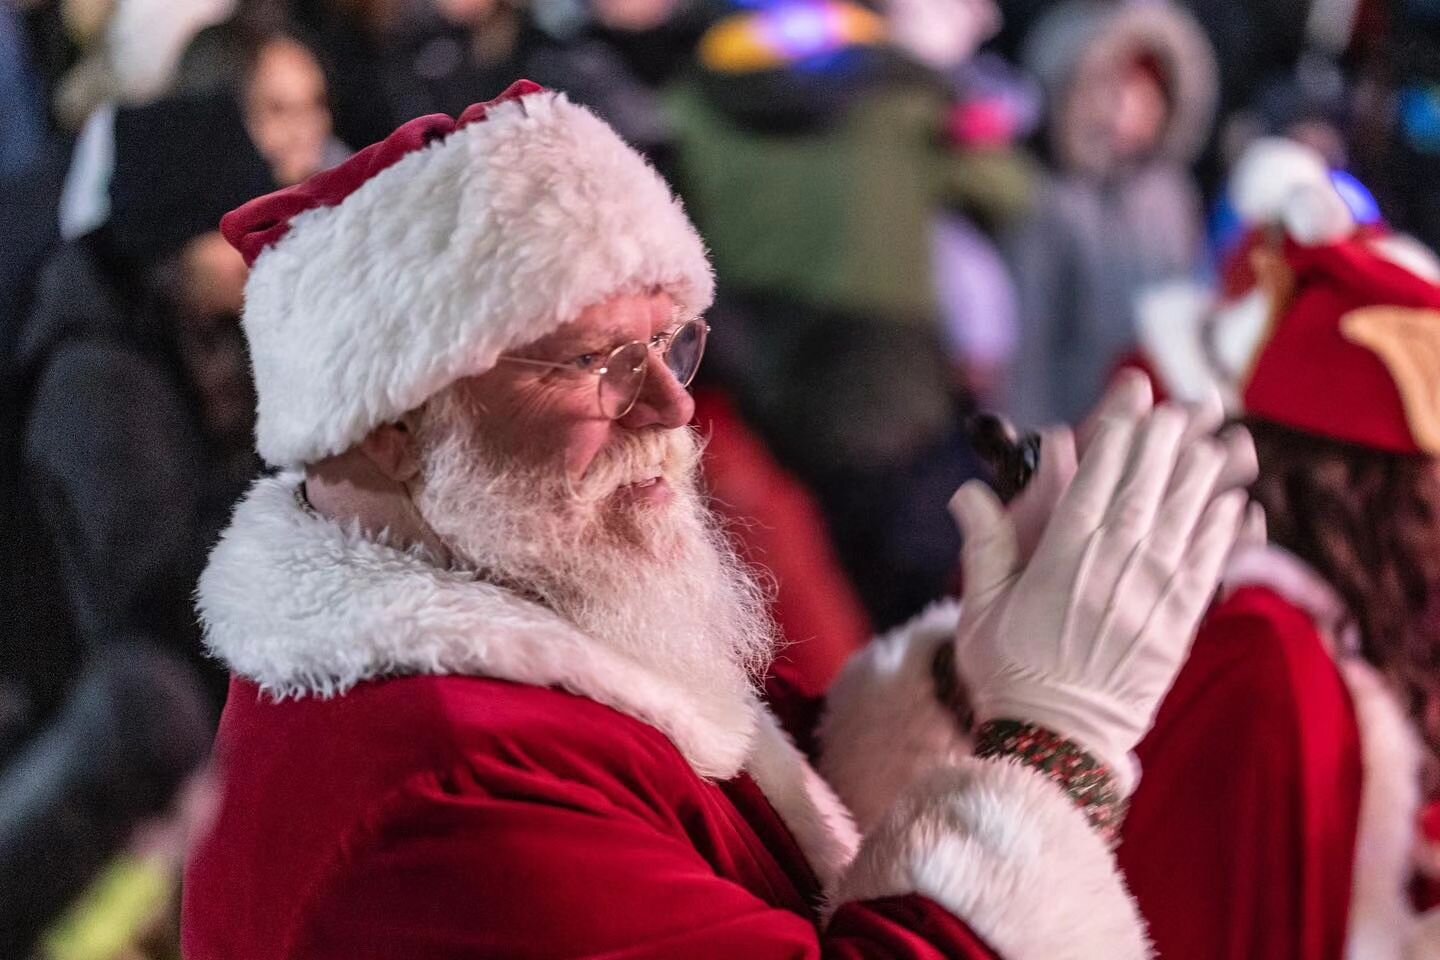 The Festival of Lights begins tonight in Downtown Bracebridge with the first big event - The Moonlight Shopping Party &amp; Street Festival.

There'll be so much festive fun from 6pm to 9pm including:

🚂A HOLIDAY TRAIN 
🎅Visit with Santa
🩰Living w